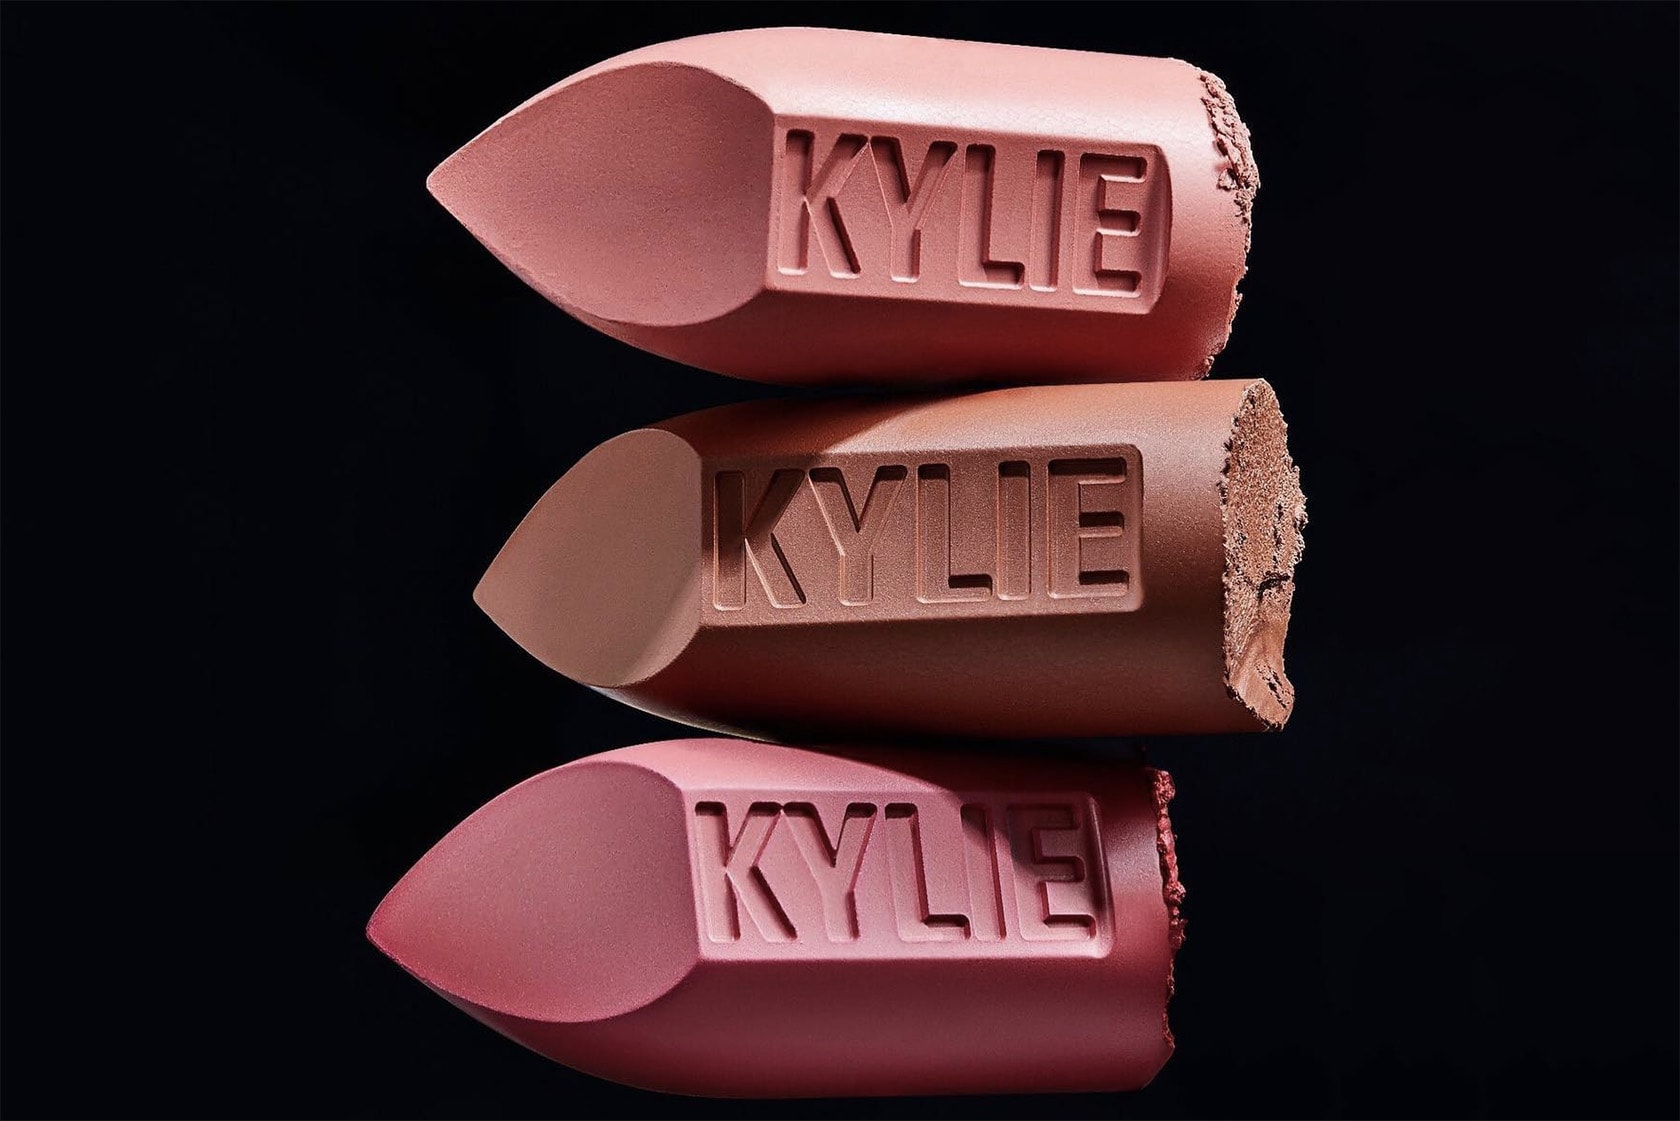 Kylie Jenner Cosmetics End of Year Sale 2018 Discounts